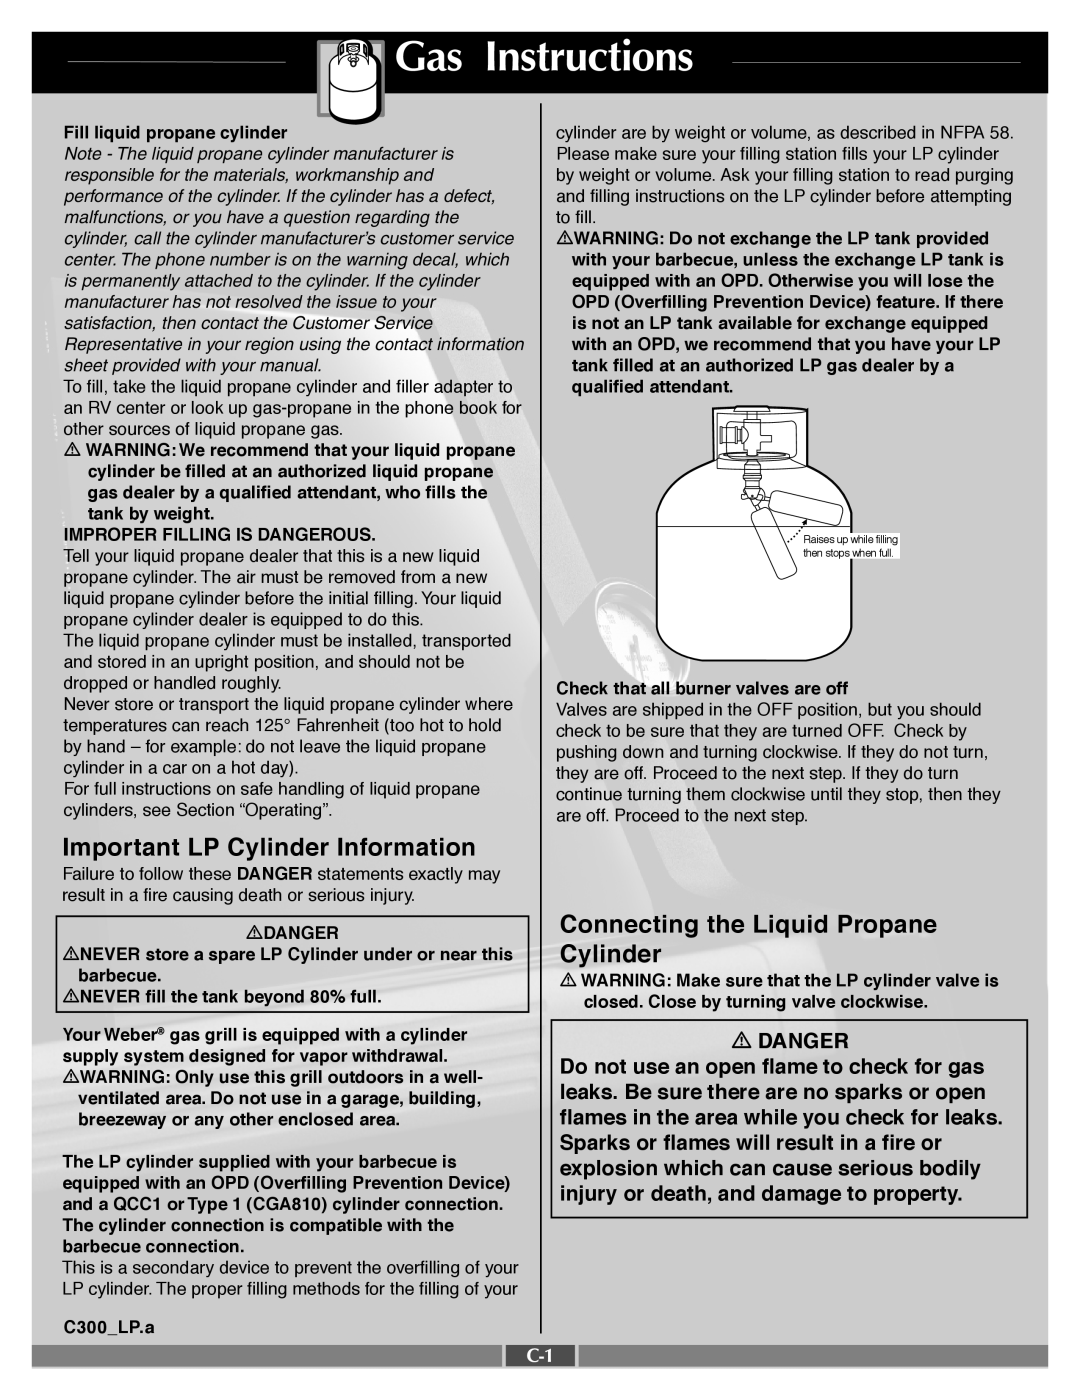 Weber 55545 manual Gas Instructions, Important LP Cylinder Information, Connecting the Liquid Propane, Danger 